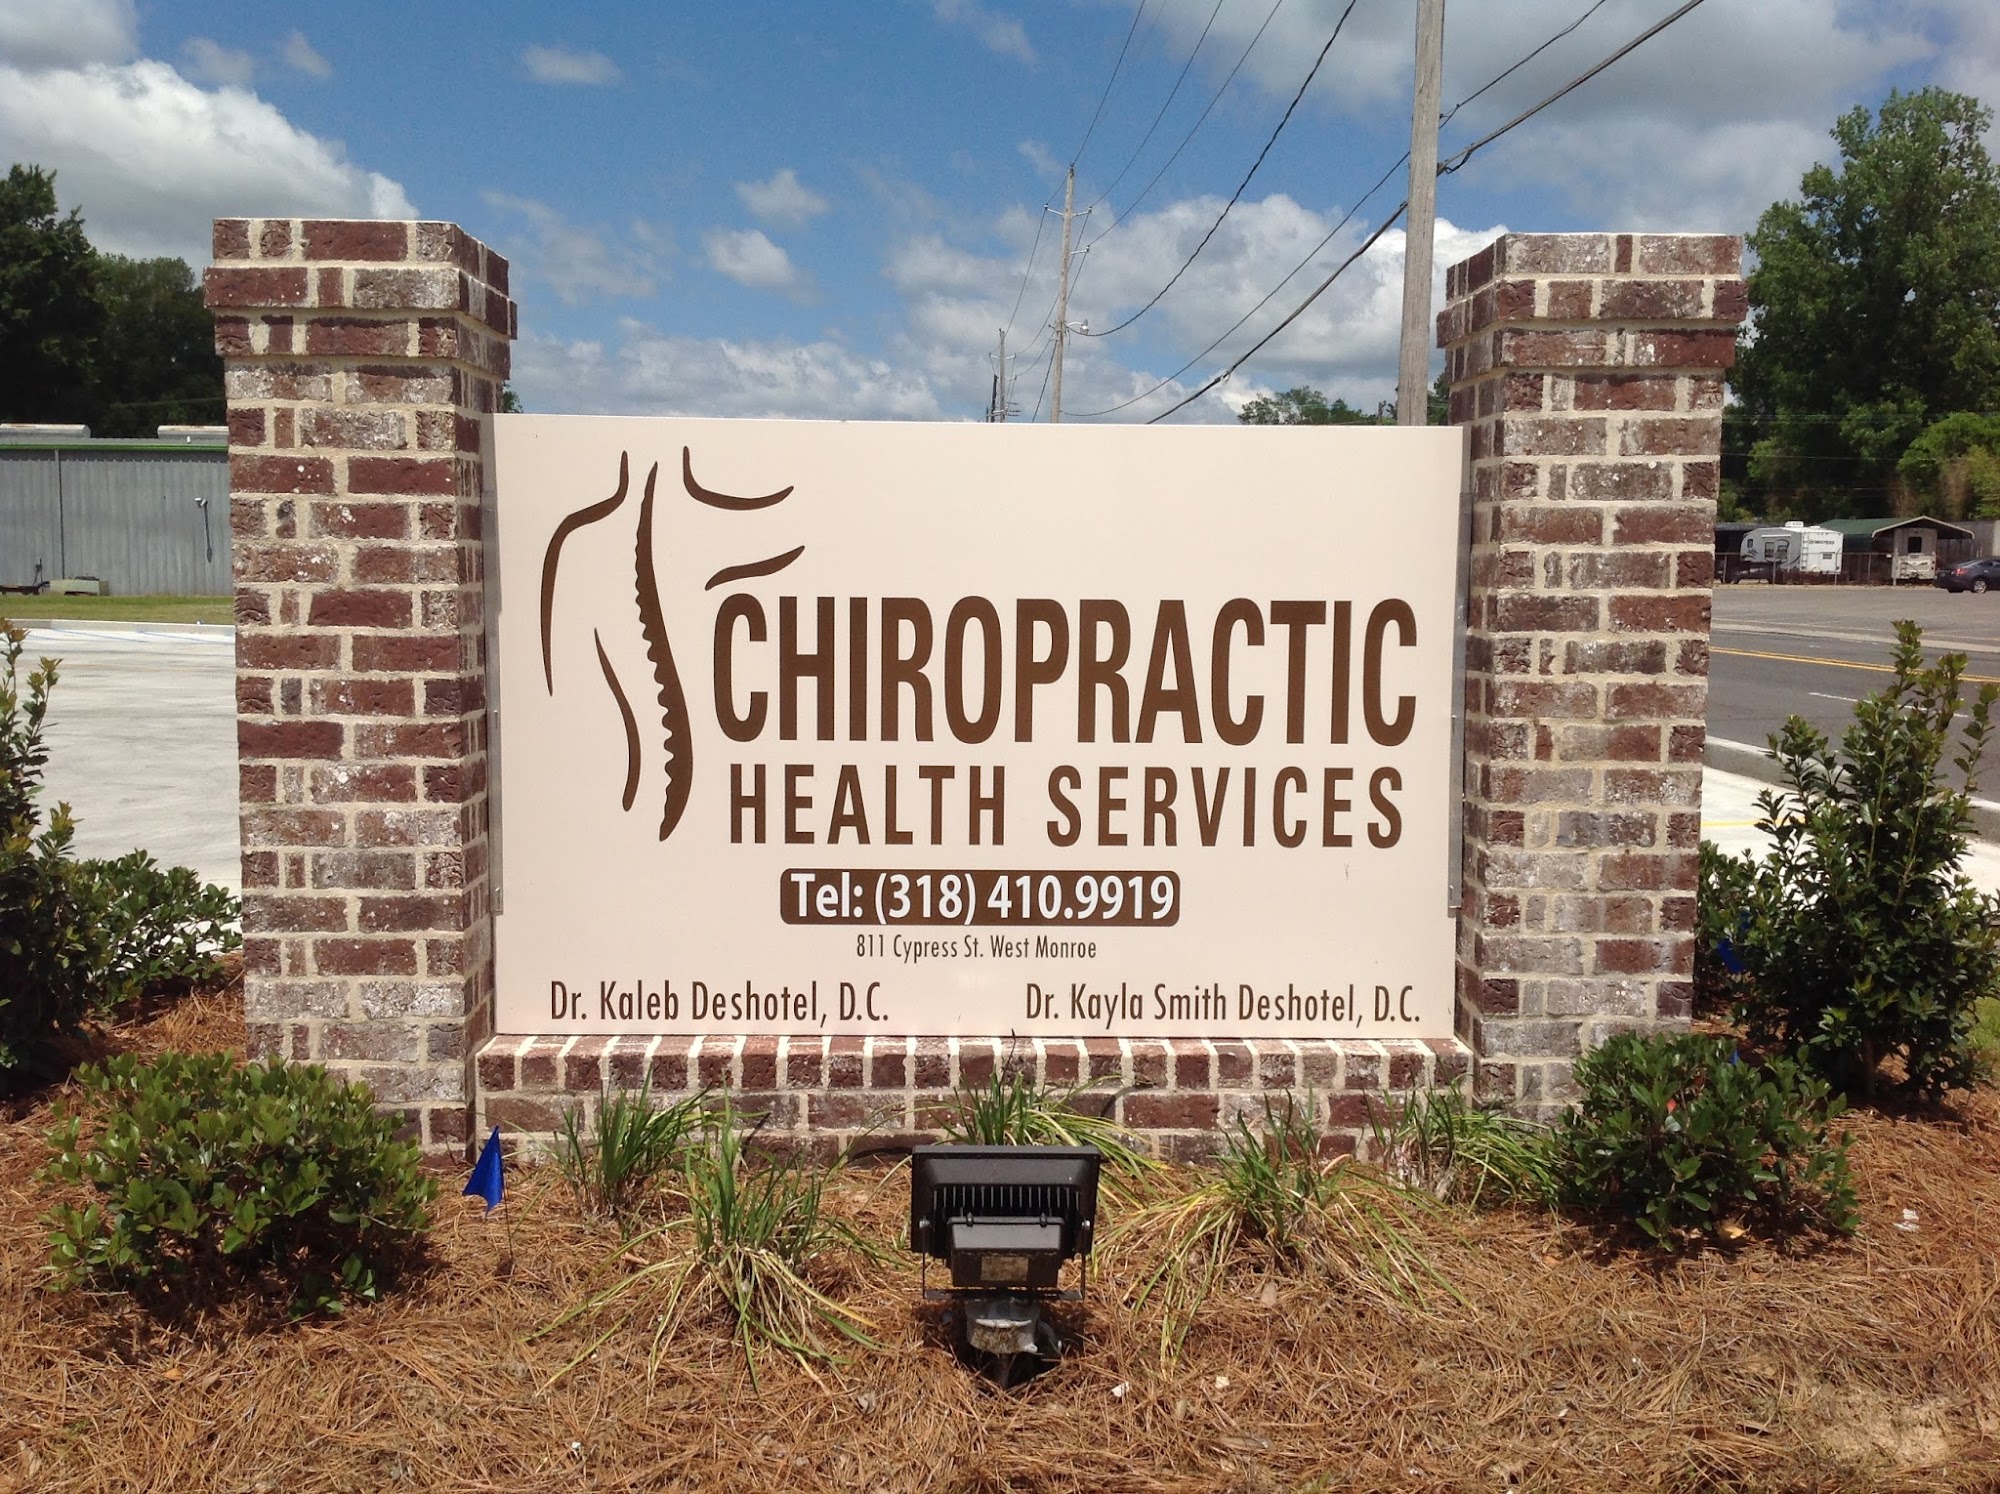 Chiropractic Health Services